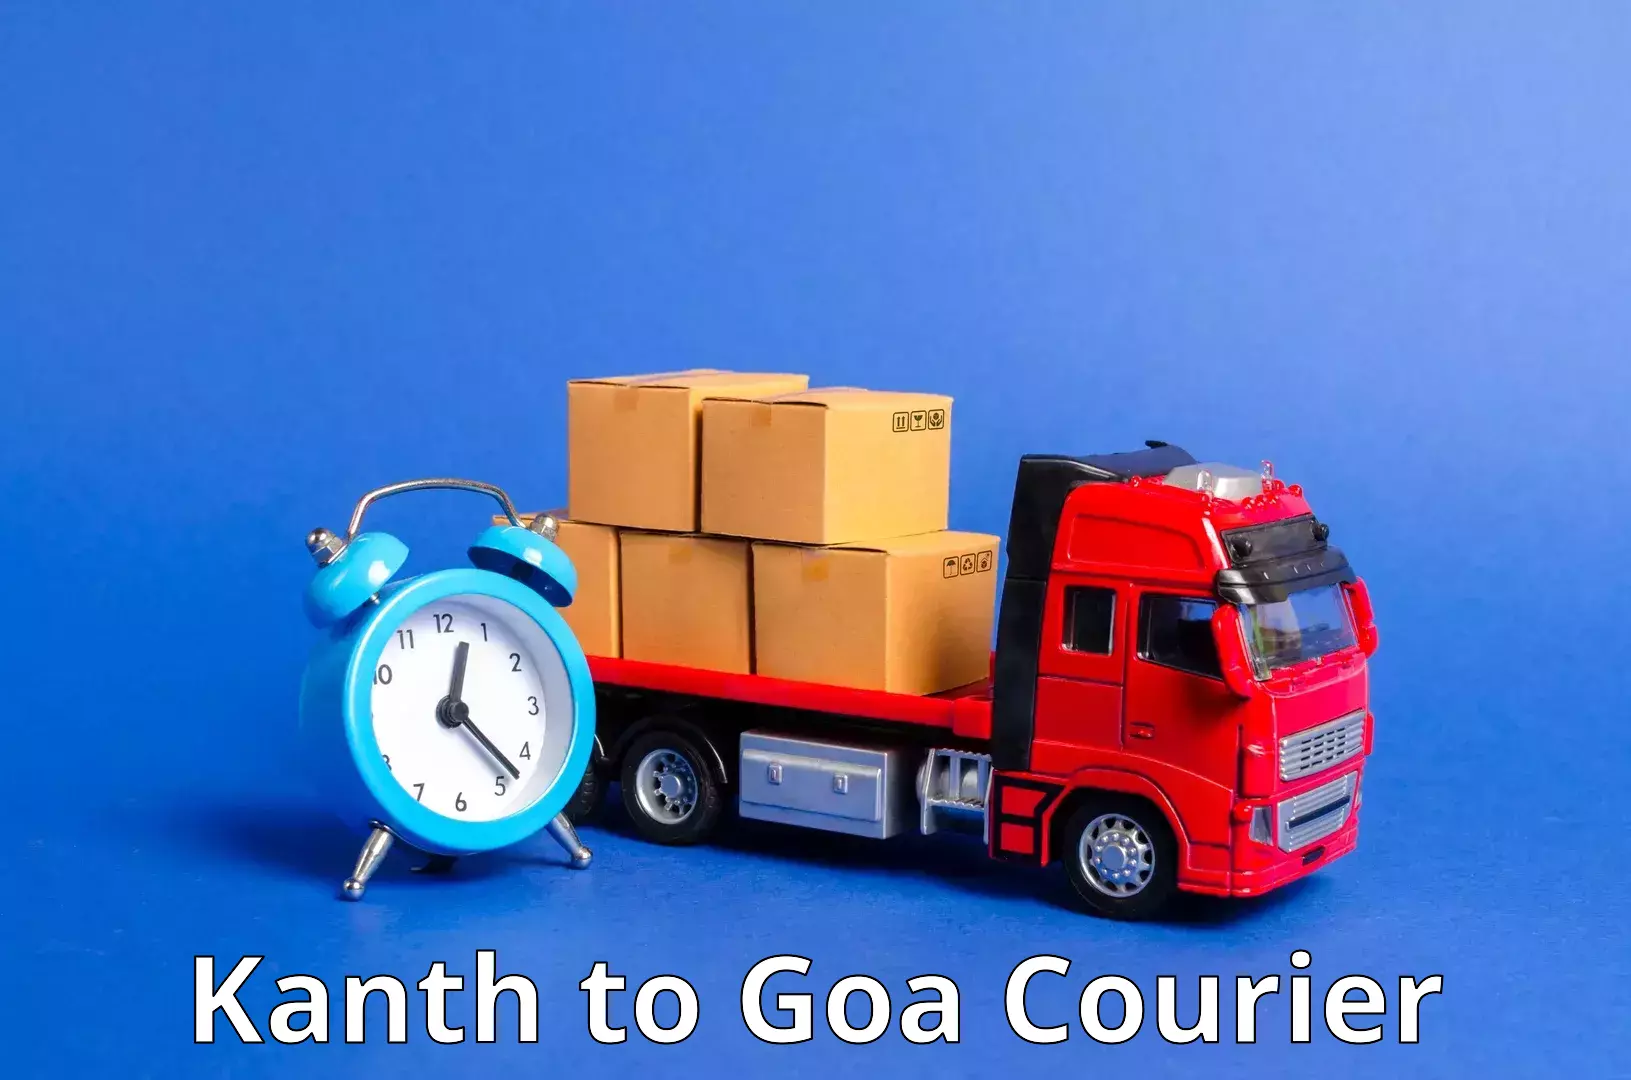 Efficient order fulfillment in Kanth to Goa University